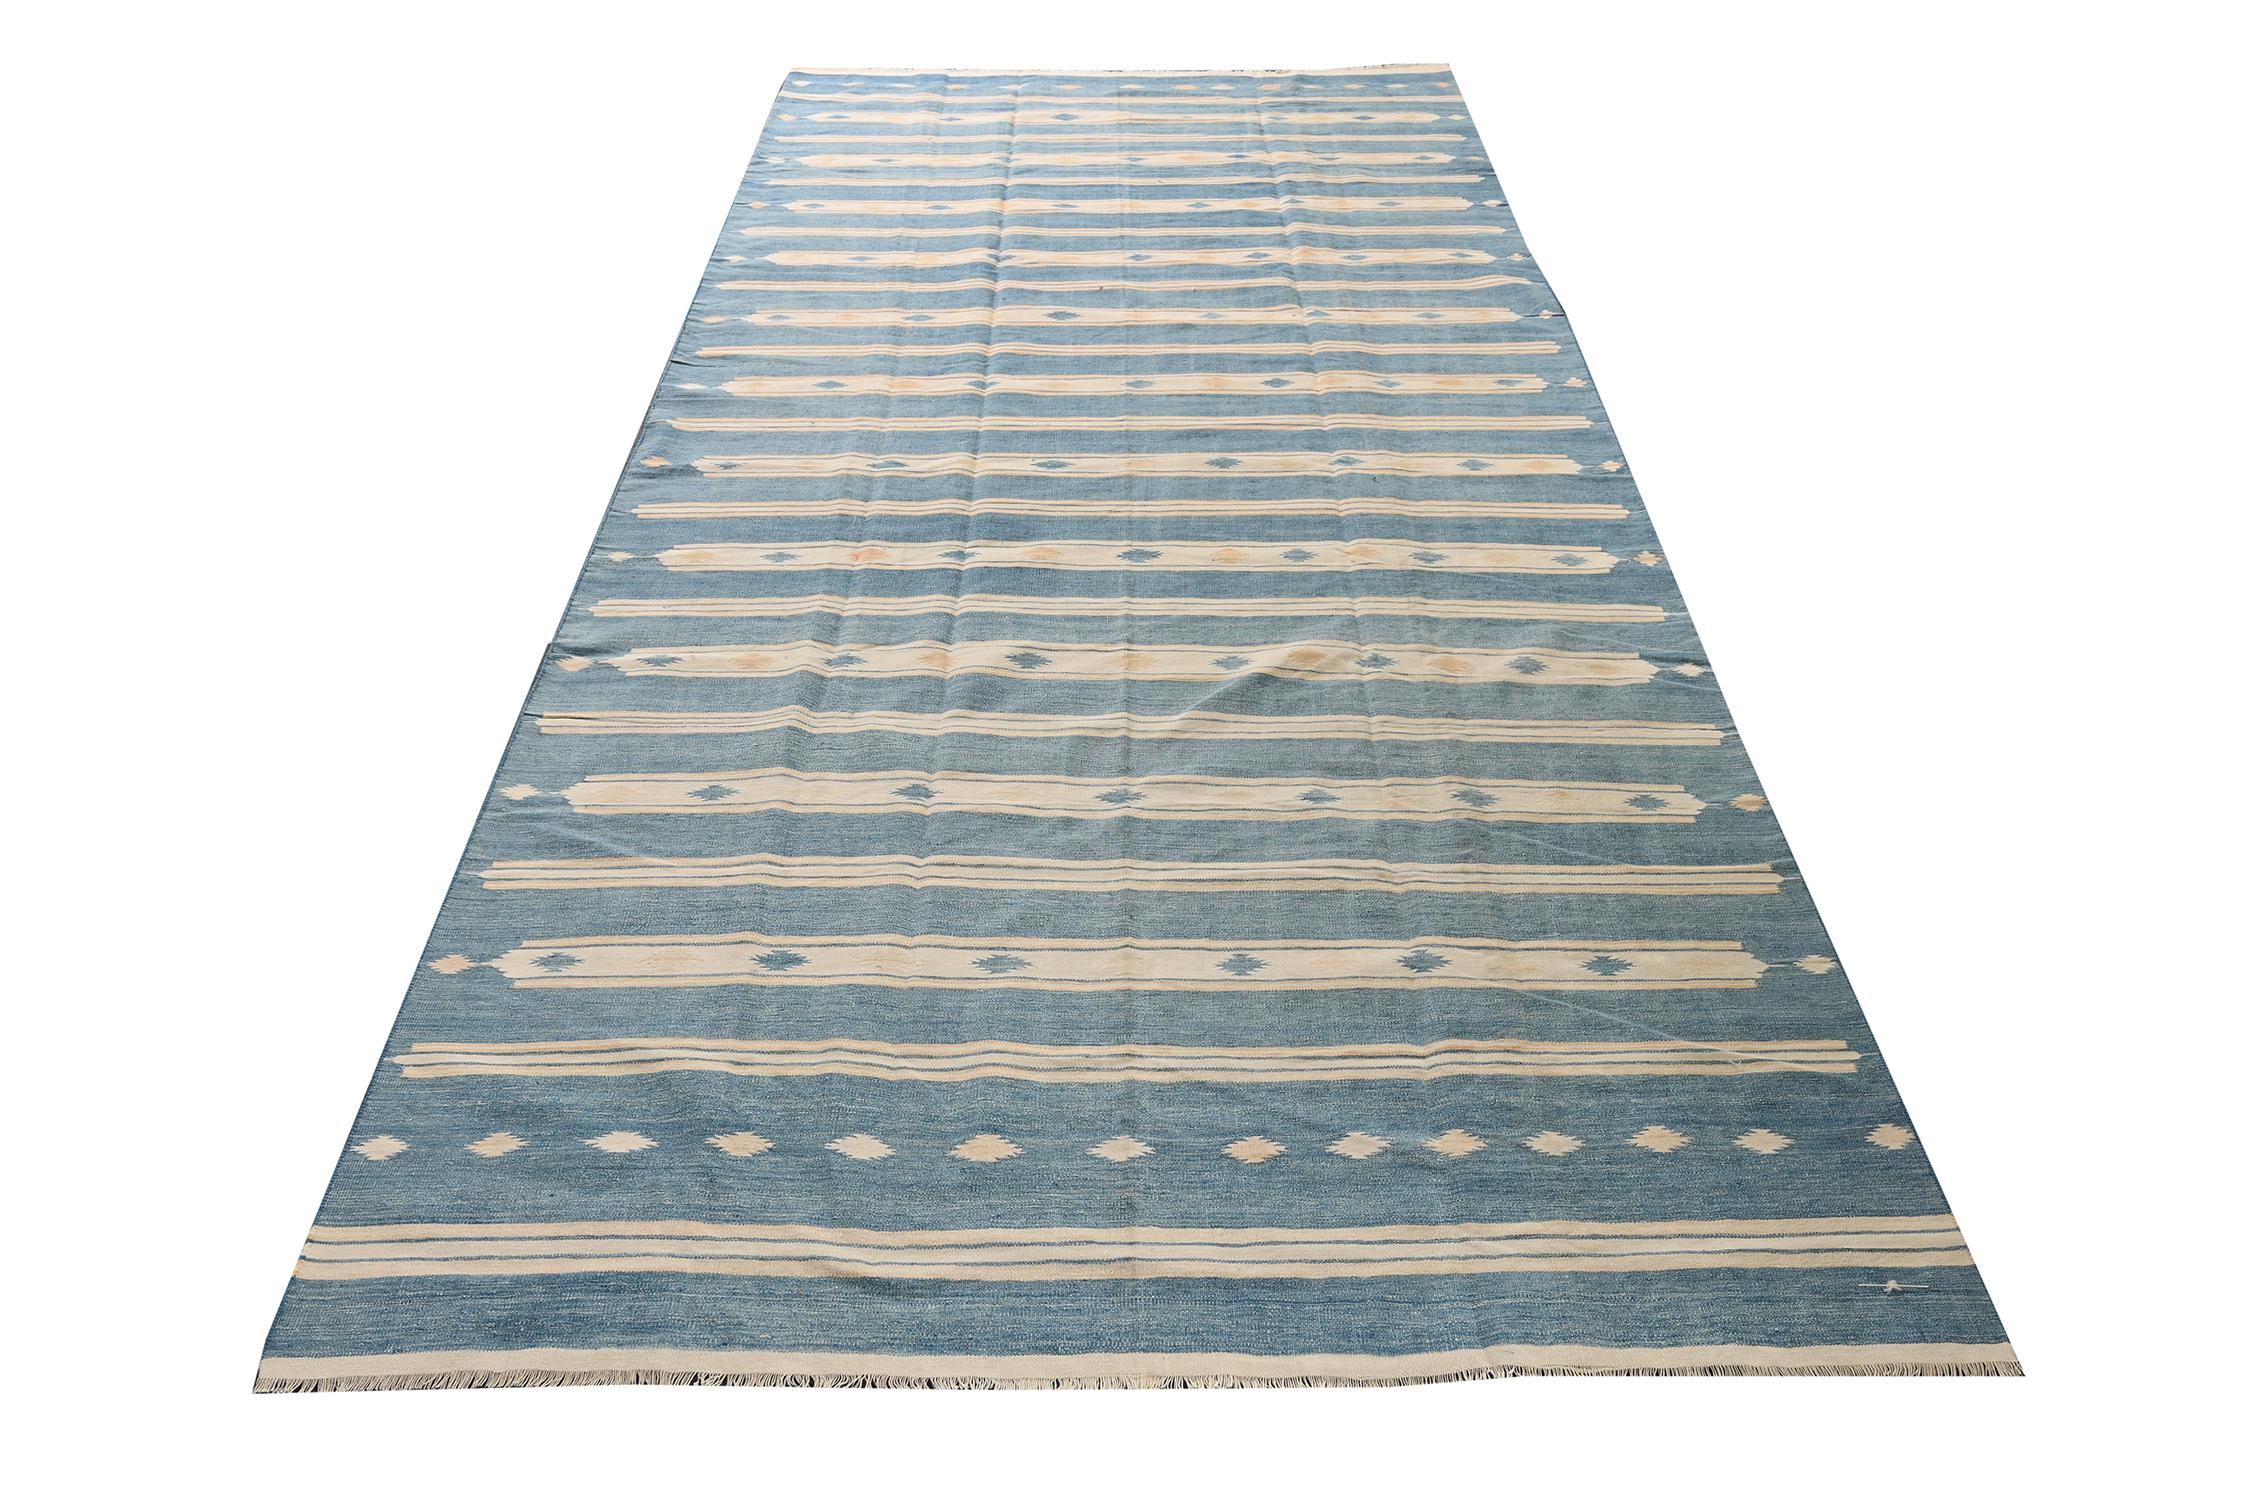 This vintage 5×11 Dhurrie is an exciting new entry in Rug & Kilim’s esteemed flat weave collection. Handwoven in cotton, it originates from India circa 1950-1960. 

On the Design:

This flat weave unfurls in blue and off-white stripes for a